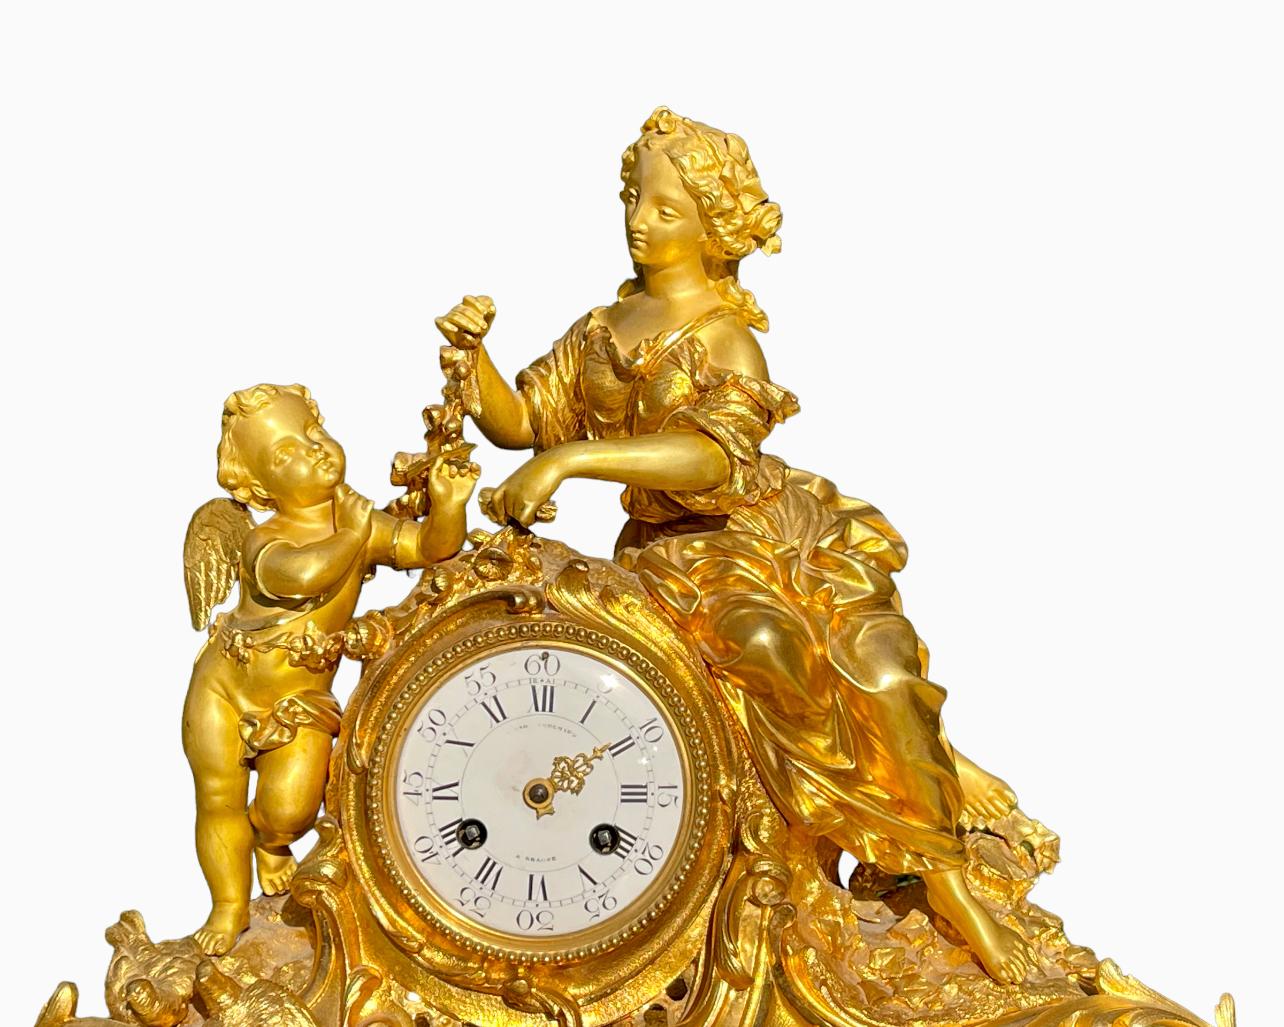 Gilt bronze clock representing Love (Cupid) and Psyche with an enamel dial in the center signed Bouchard à Beaune. Very beautiful original gilding and good general condition.
Please note - a needle is missing on the dial.

Dimensions
Height